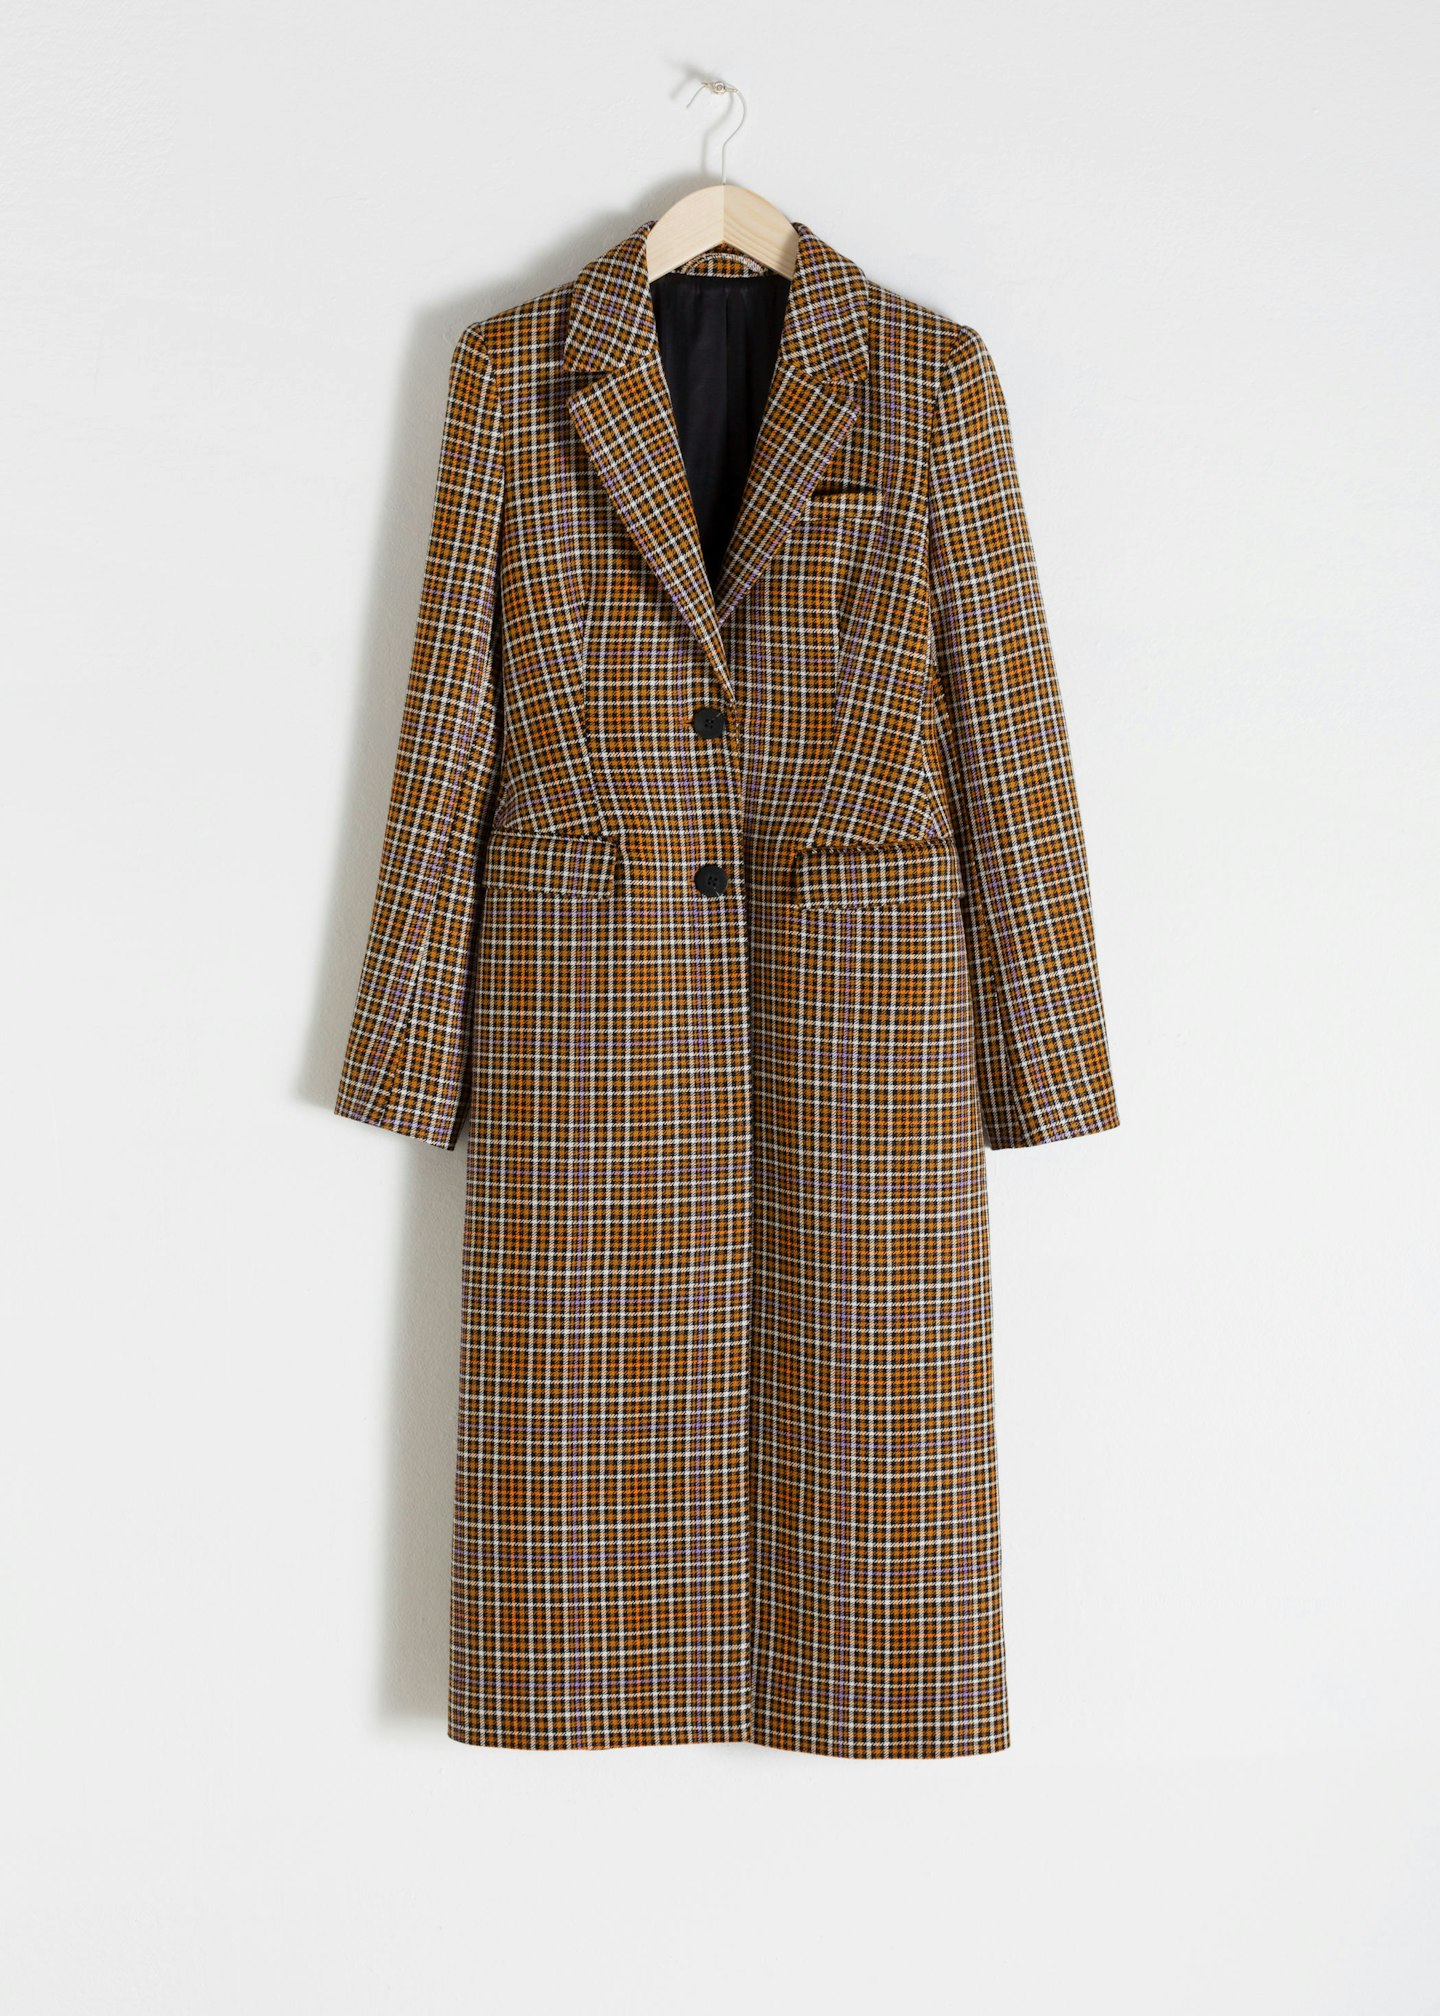 & Other Stories coat